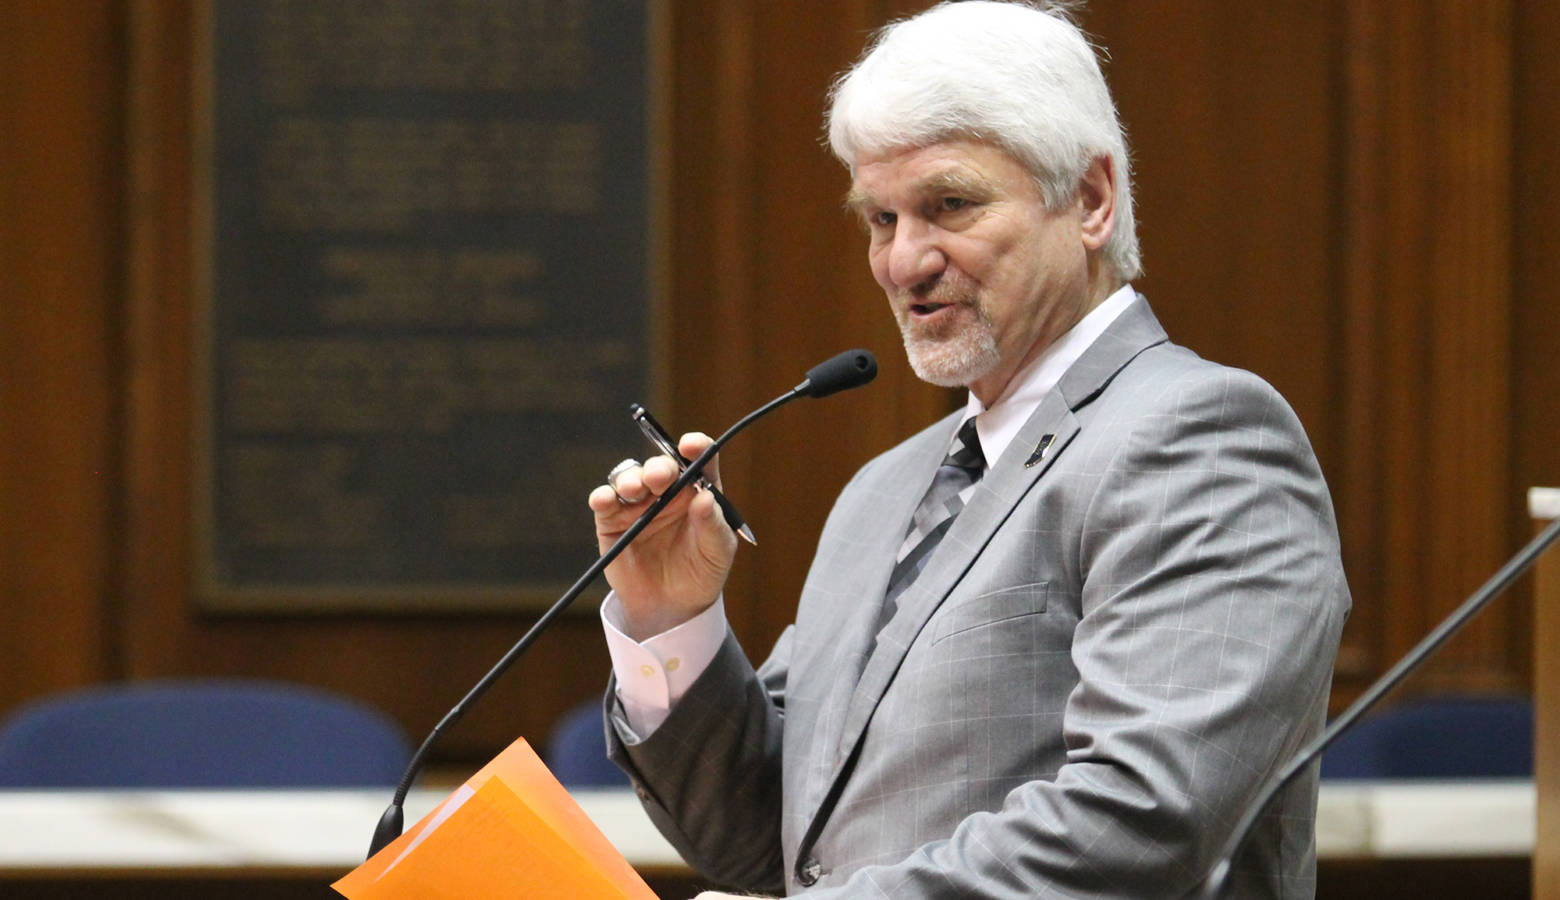 Rep. Tony Cook authored HB 1404, which outlines what metrics the state board of education should consider to use for grading schools. (Lauren Chapman/IPB News)